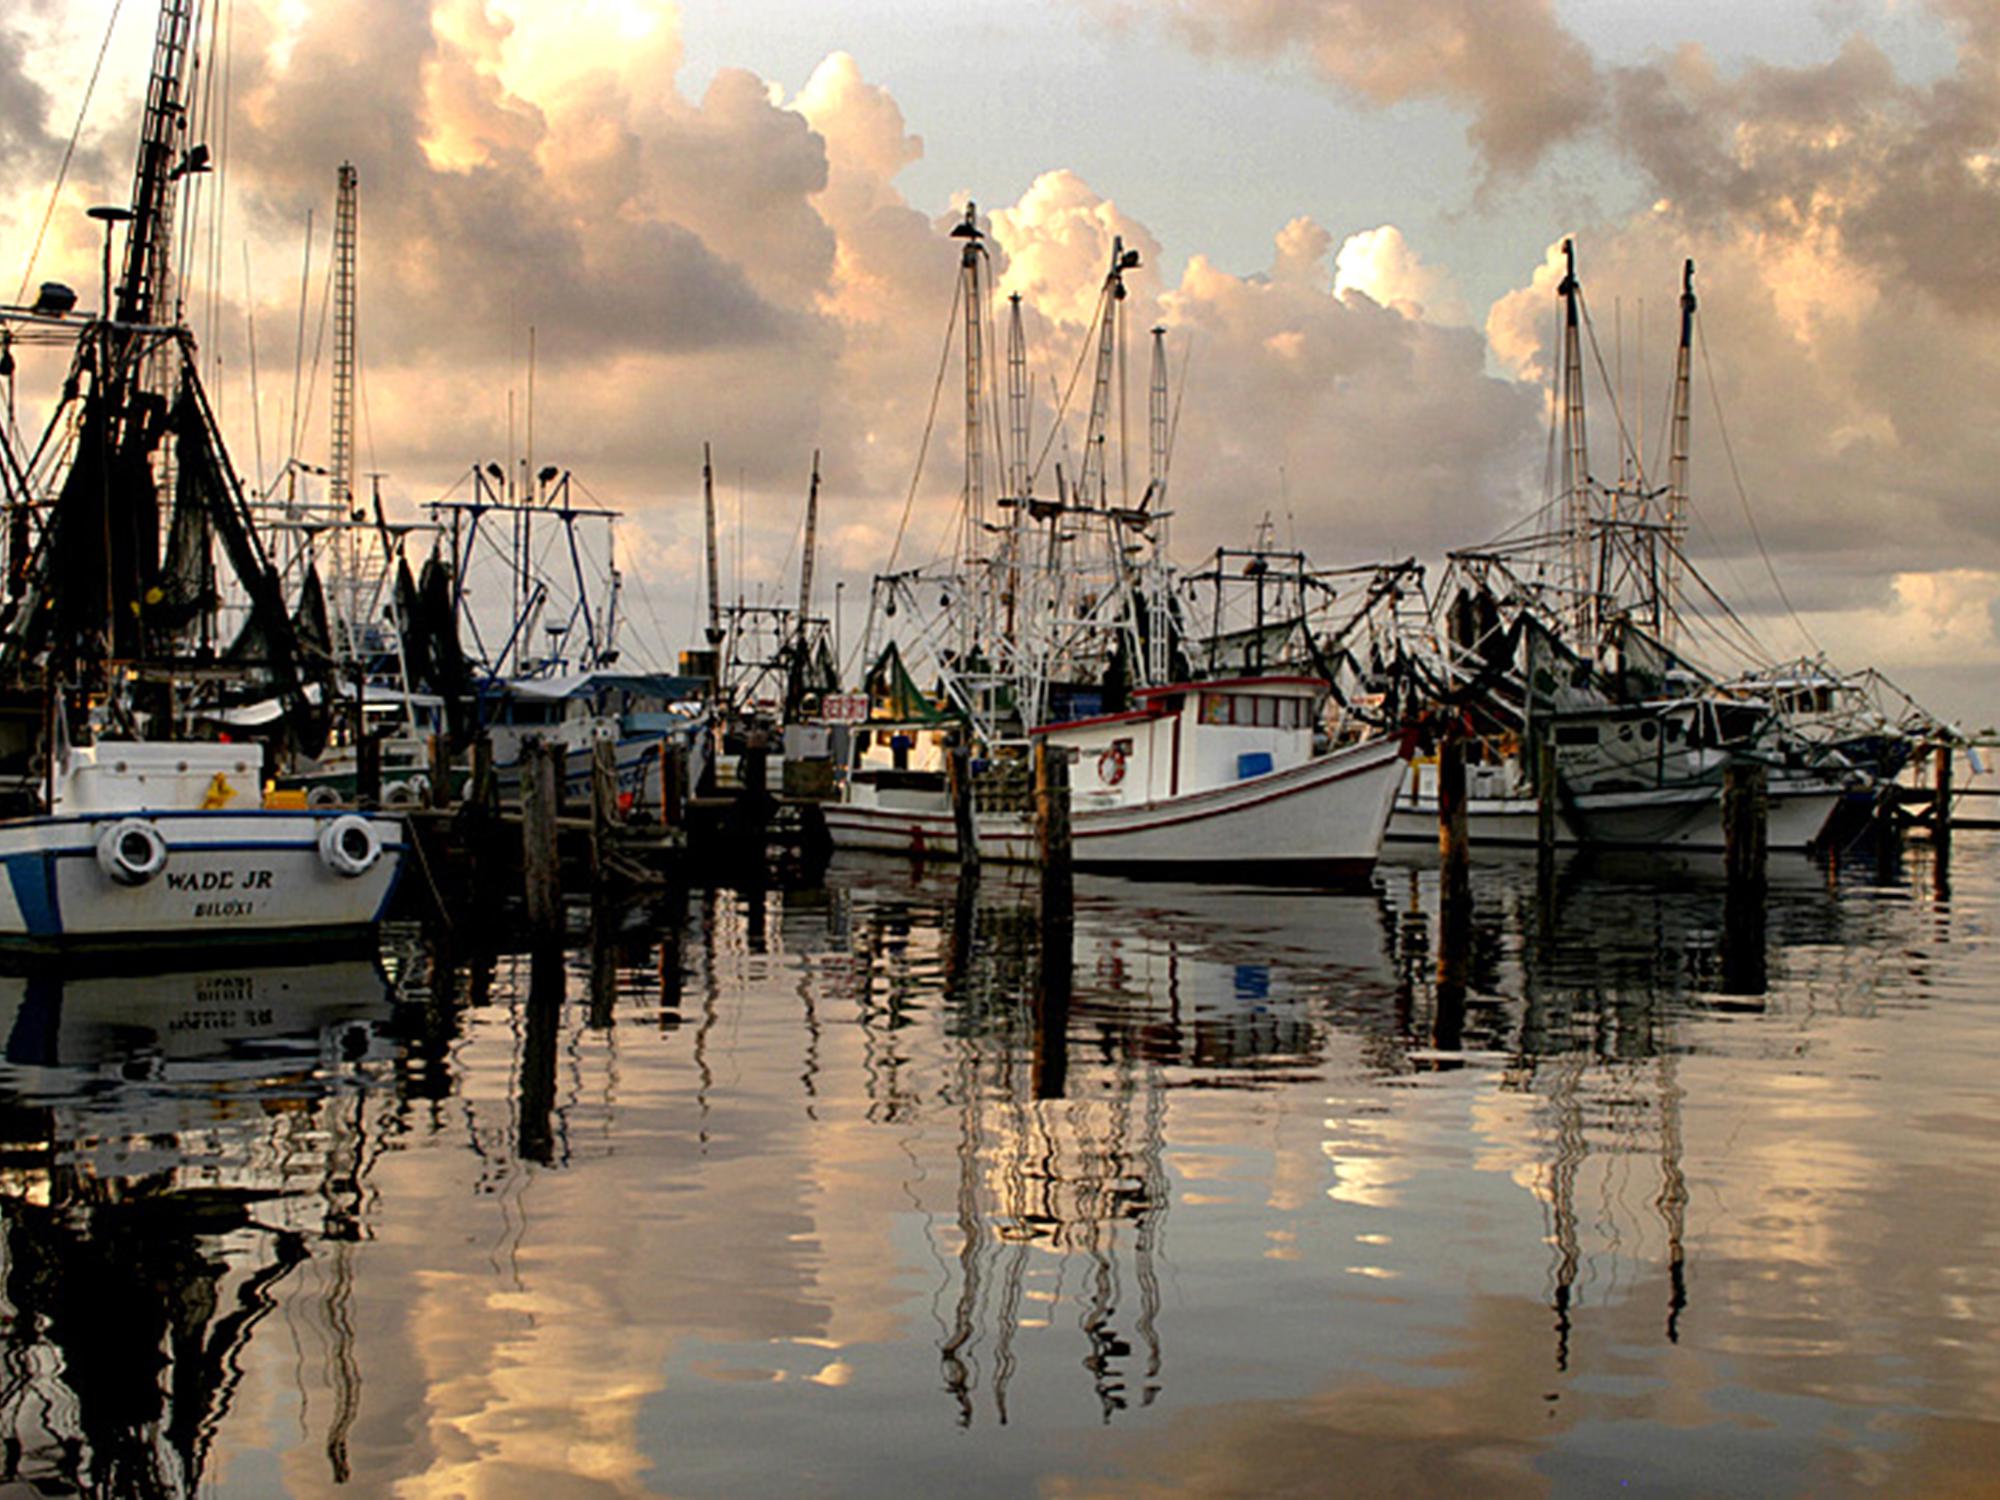 Low prices and an unusual season are making it difficult for Mississippi fishermen to harvest the state's shrimp crop. (Photo by MSU Extension/Dave Burrage)